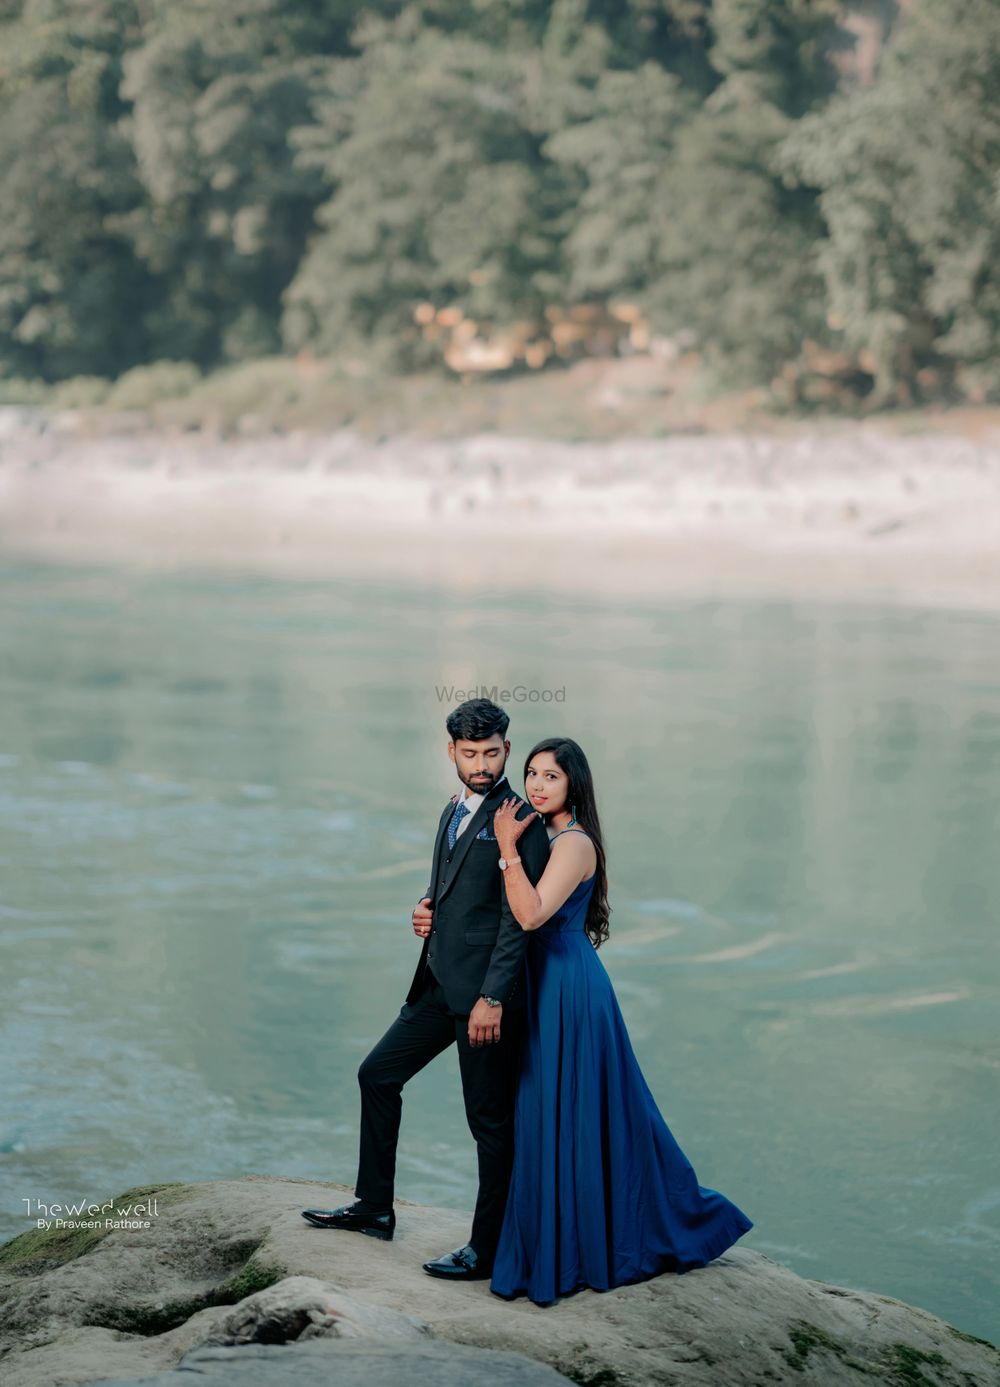 Photo From sneha&shubham - By The Wedwell by Praveen Rathore